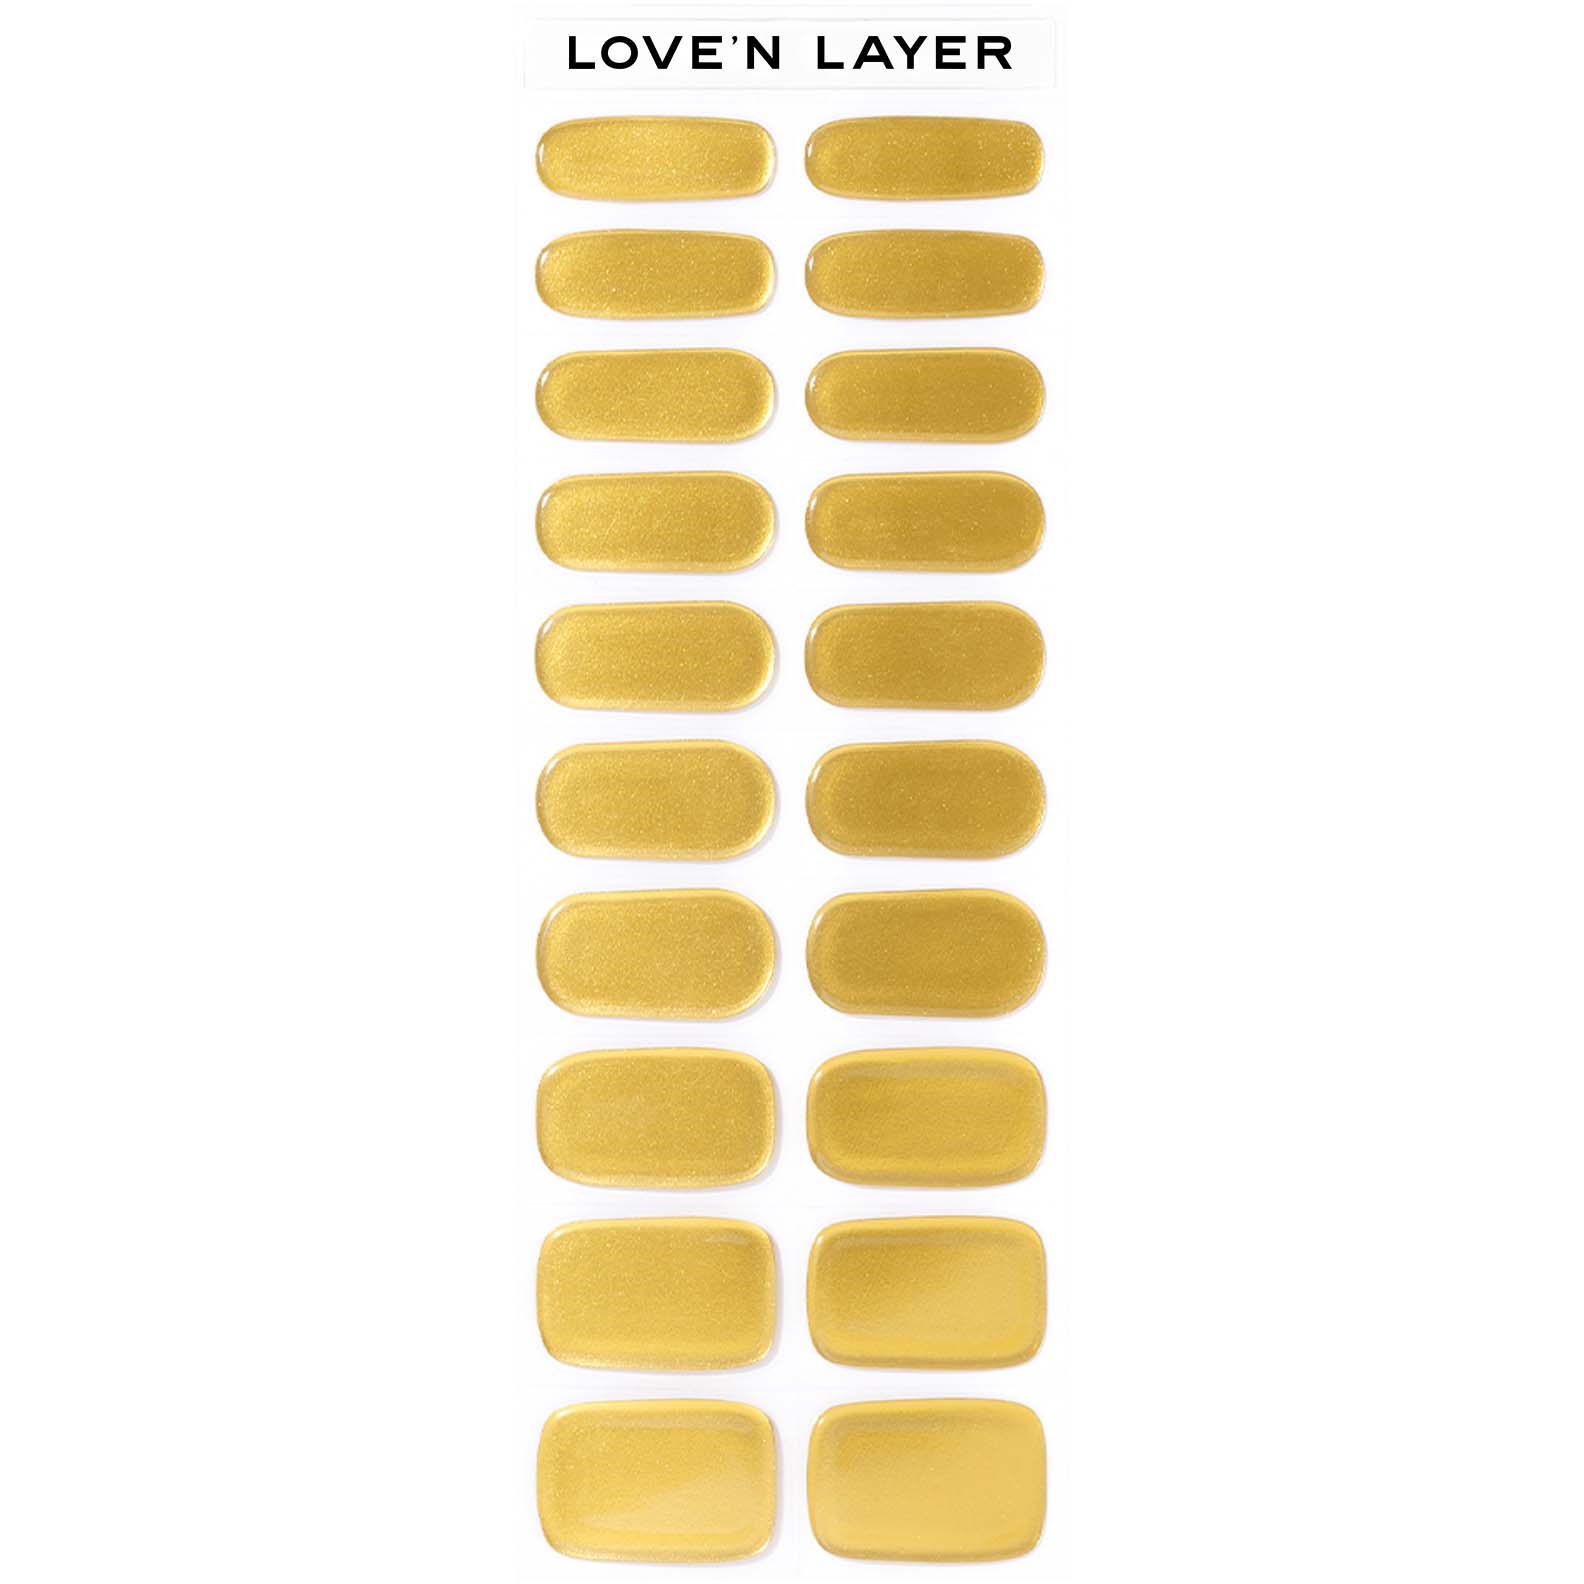 Loven Layer Love Note Metallic Shiny Gold